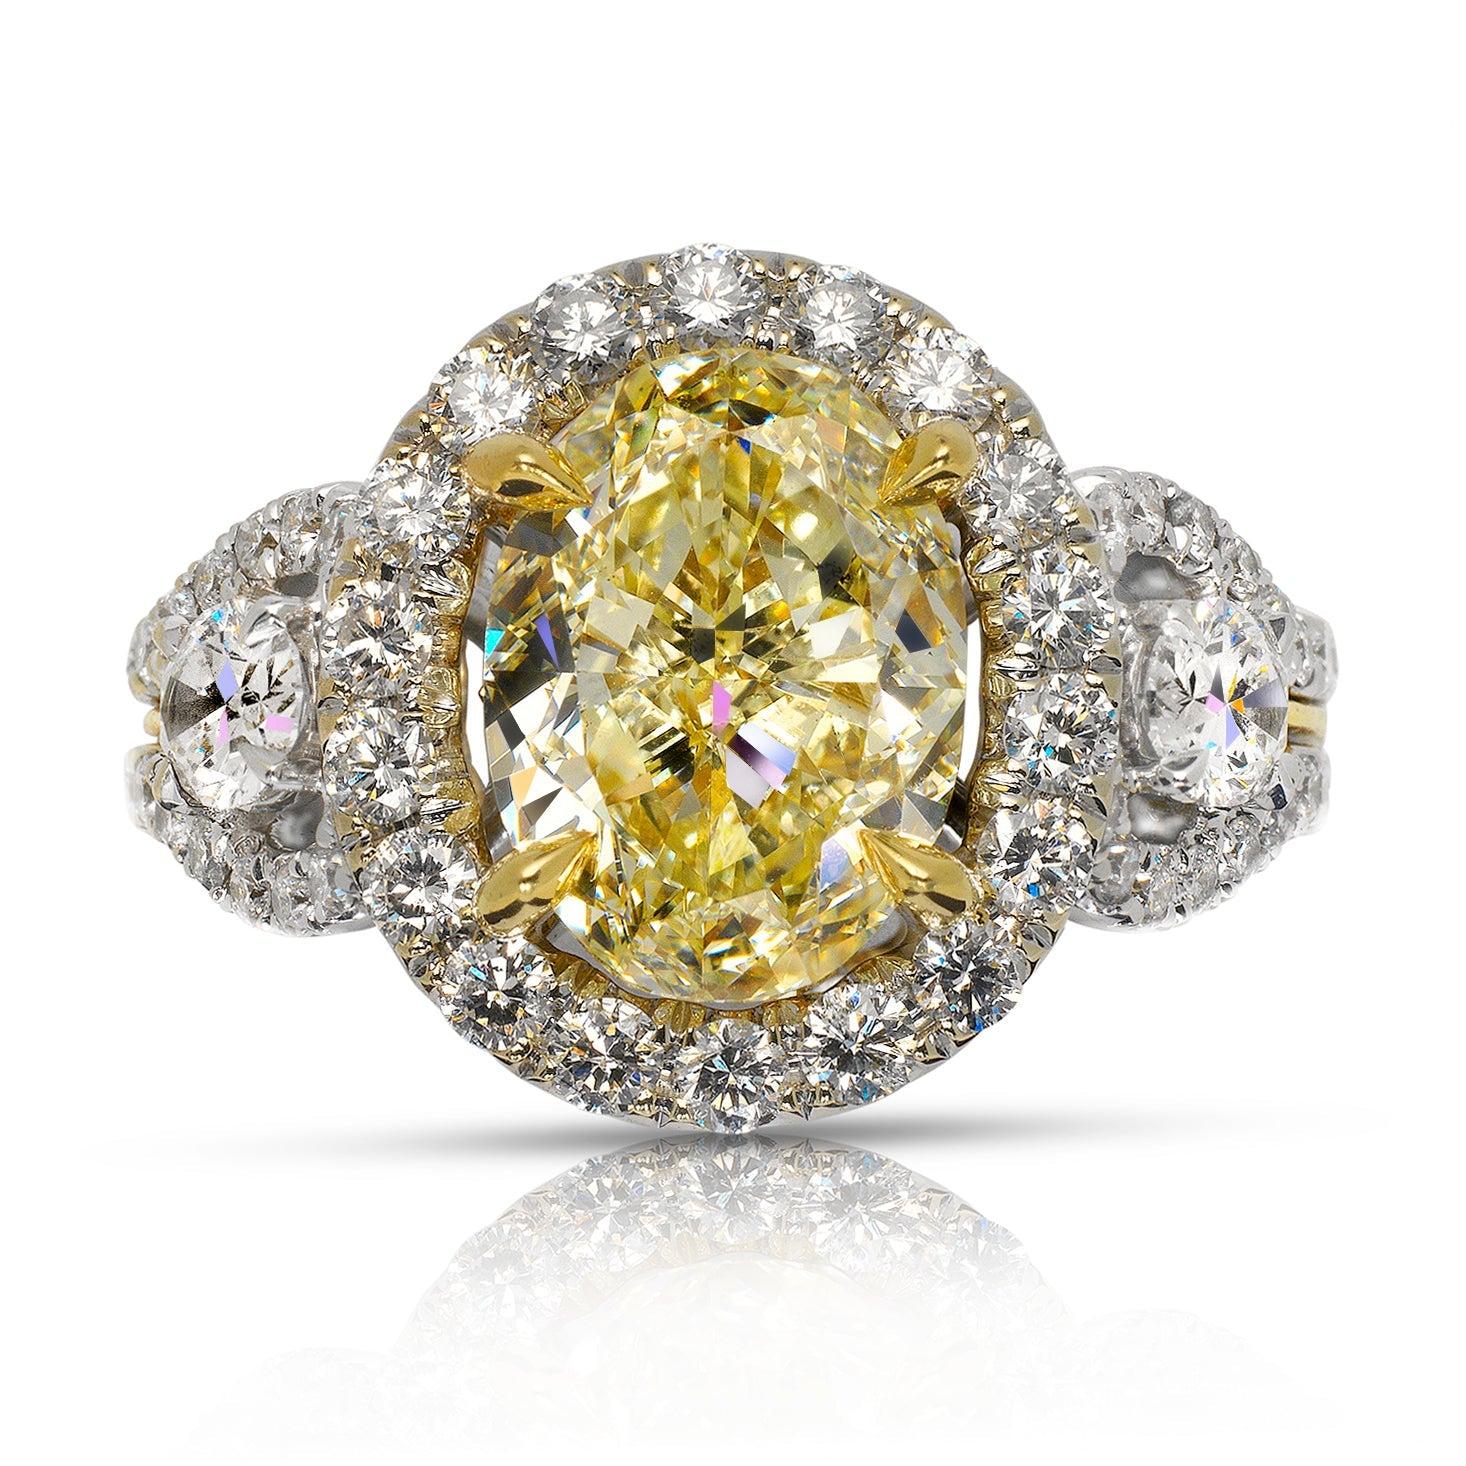 LIZA -OVAL CUT FANCY LIGHT YELLOW DIAMOND ENGAGEMENT HALO AND THREE STONE RING BY MIKE NEKTA
GIA CERTIFIED
Center Diamond:
Carat Weight: 3 Carats
Color : FANCY LIGHT YELLOW -FLY
Clarity: SI2
Style: OVAL BRILLIANT
Approximate Measurements: 10.2 x 7.5